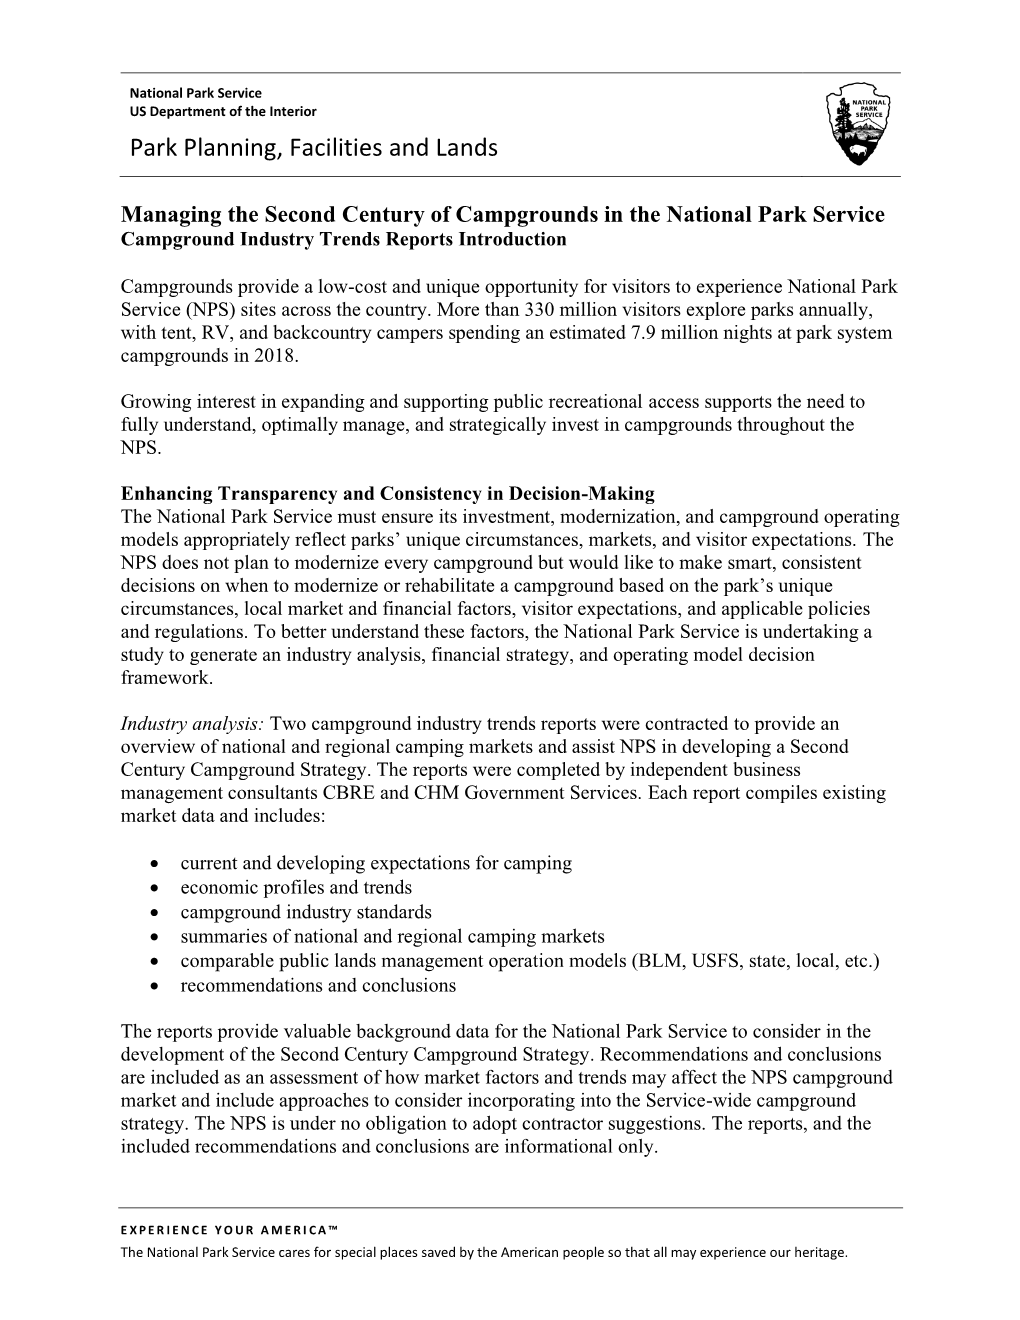 NPS Report on Campground Improvement Strategy